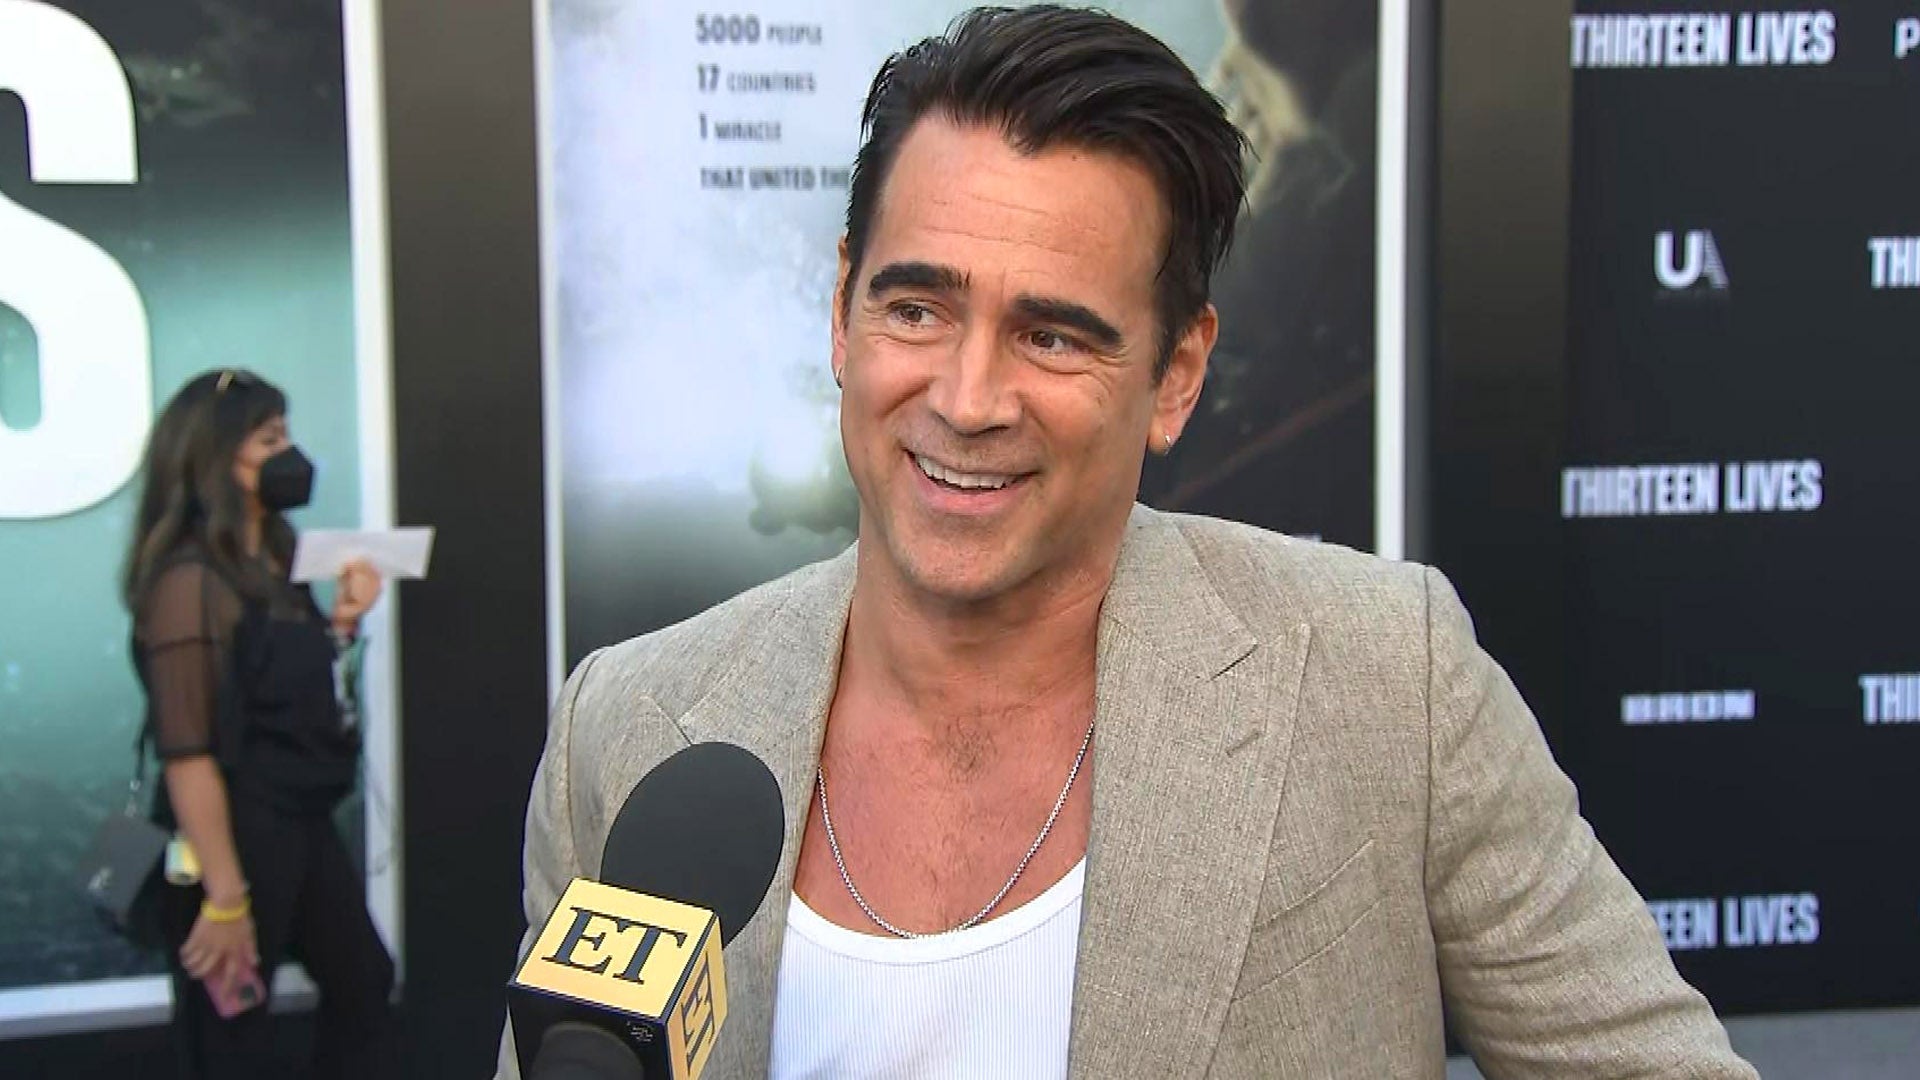 Colin Farrell on ‘Terrifying’ Experience Filming Underwater for ‘Thirteen Lives’ Film (Exclusive)